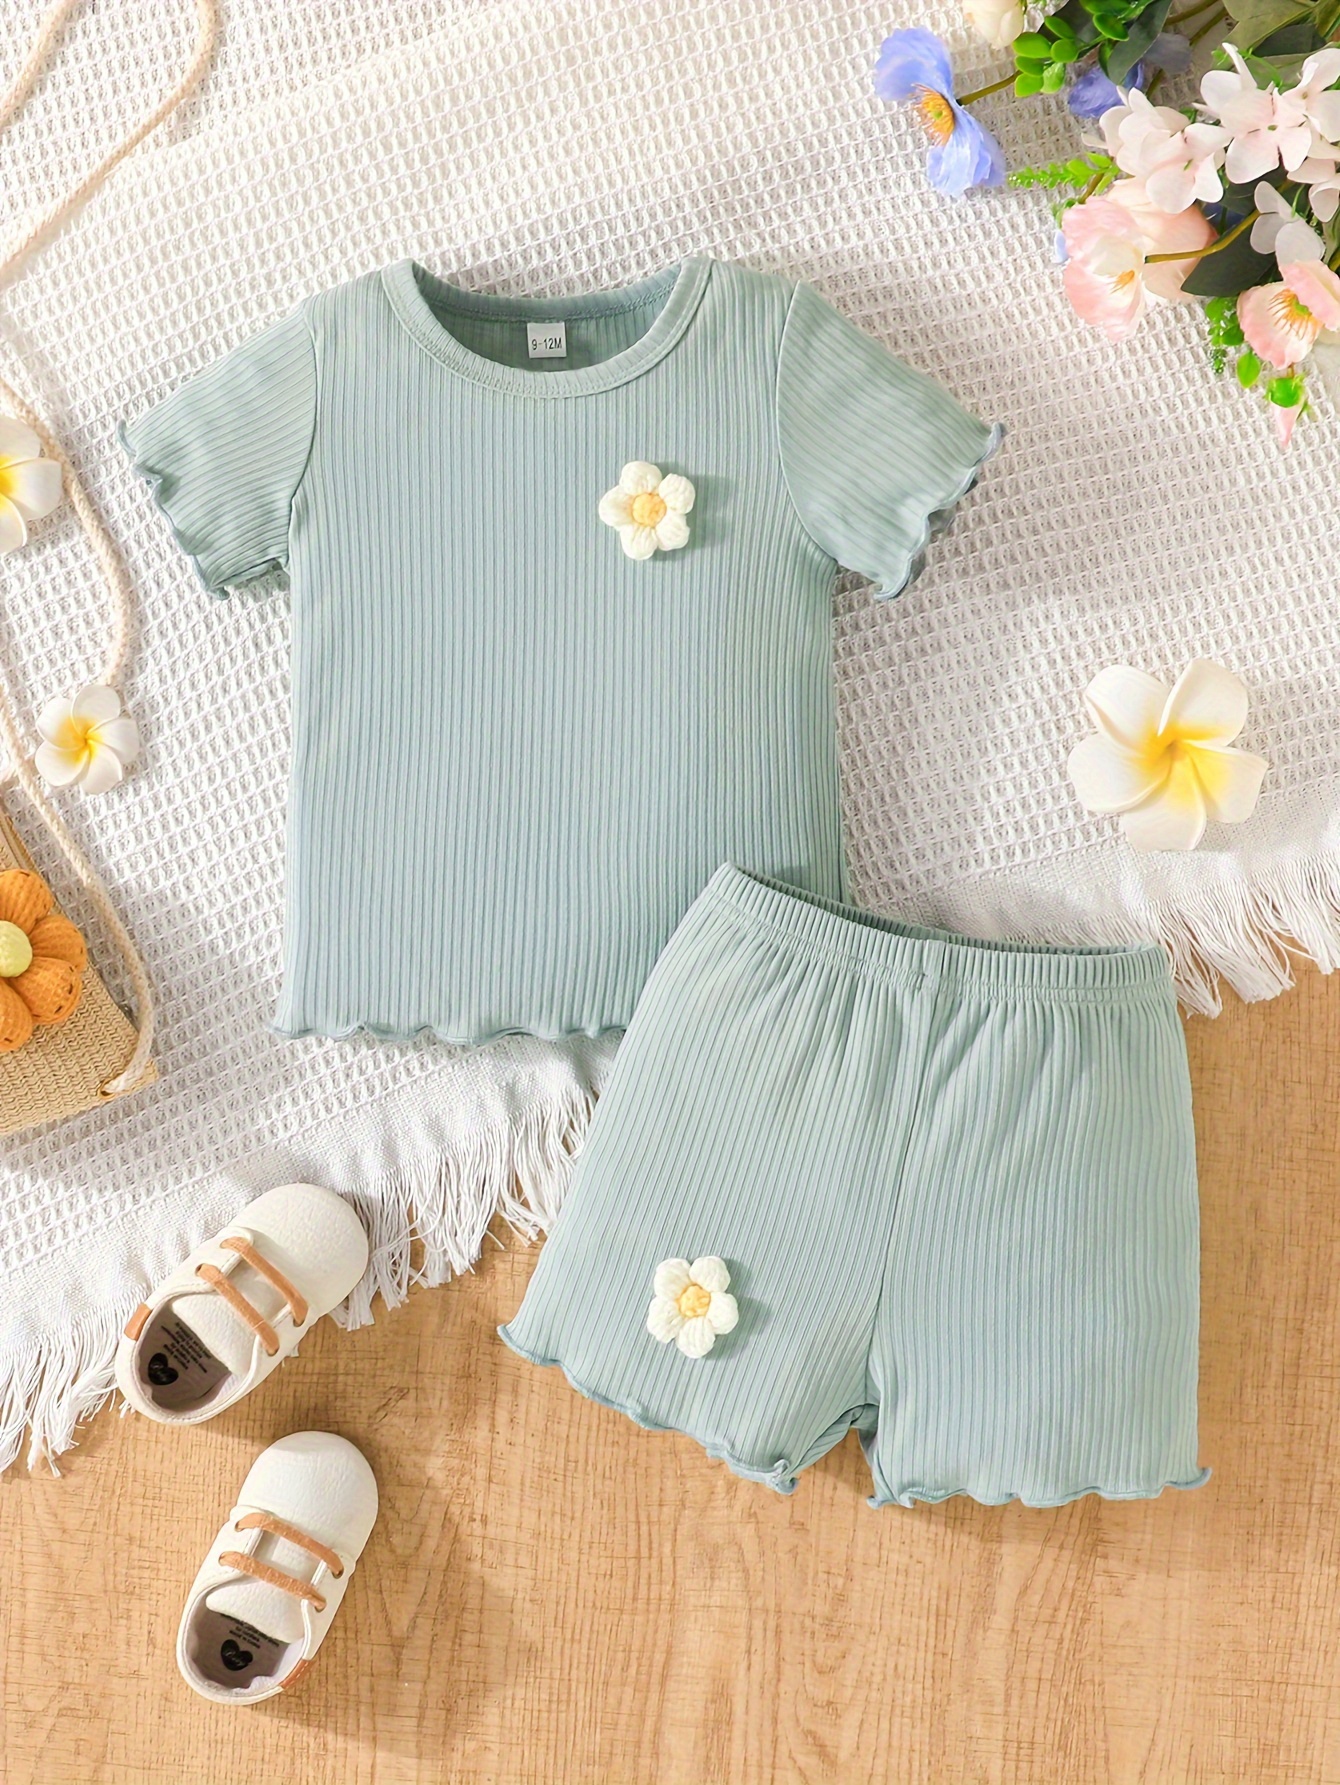 Bullpiano Newborn Baby Girl Clothes Outfits Short Sets Romper + Short Pants  Cute Summer Infant Baby Girl Clothes 12-18 Months 